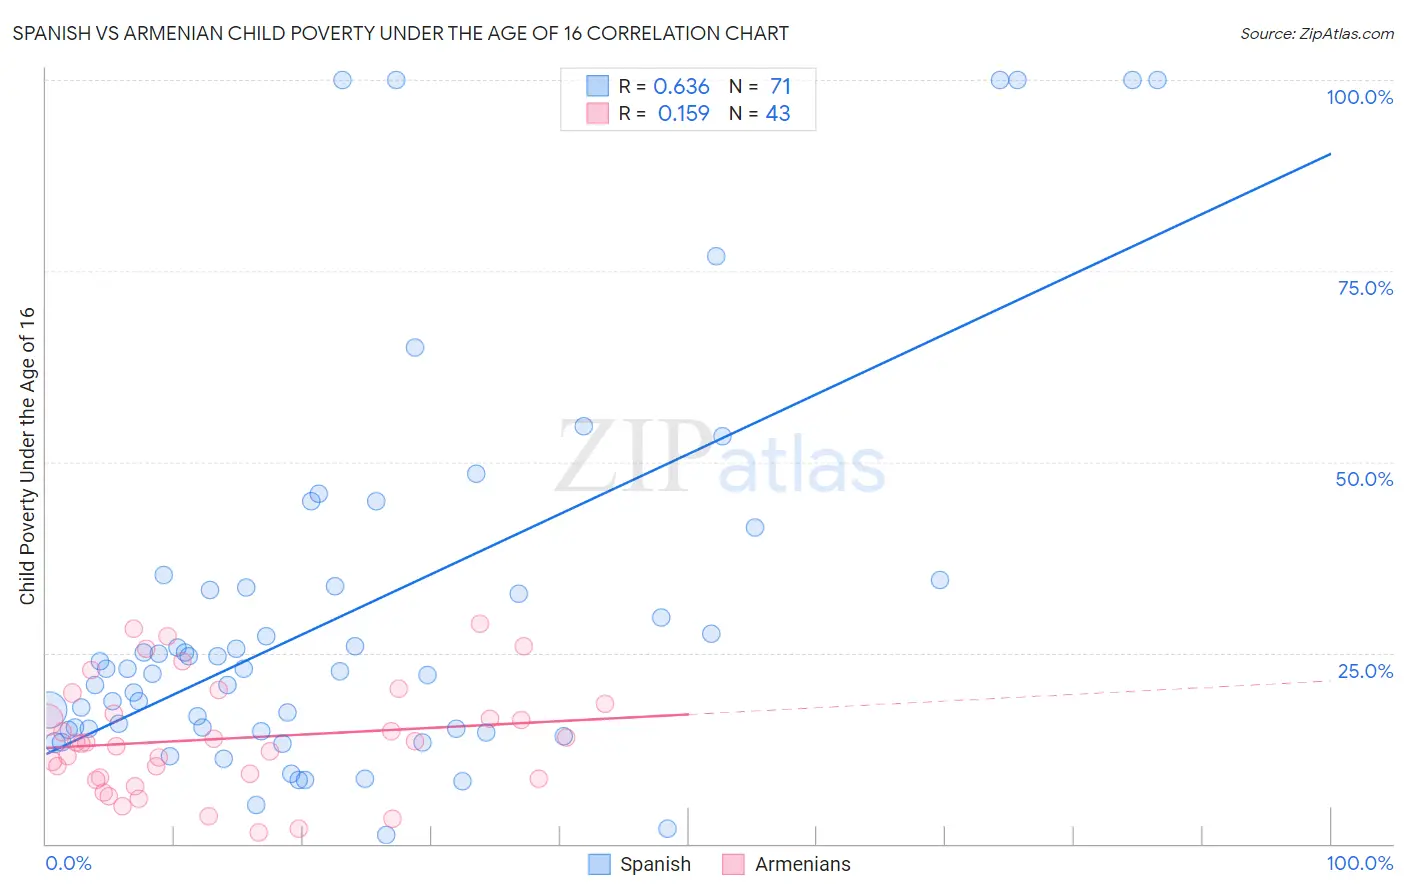 Spanish vs Armenian Child Poverty Under the Age of 16